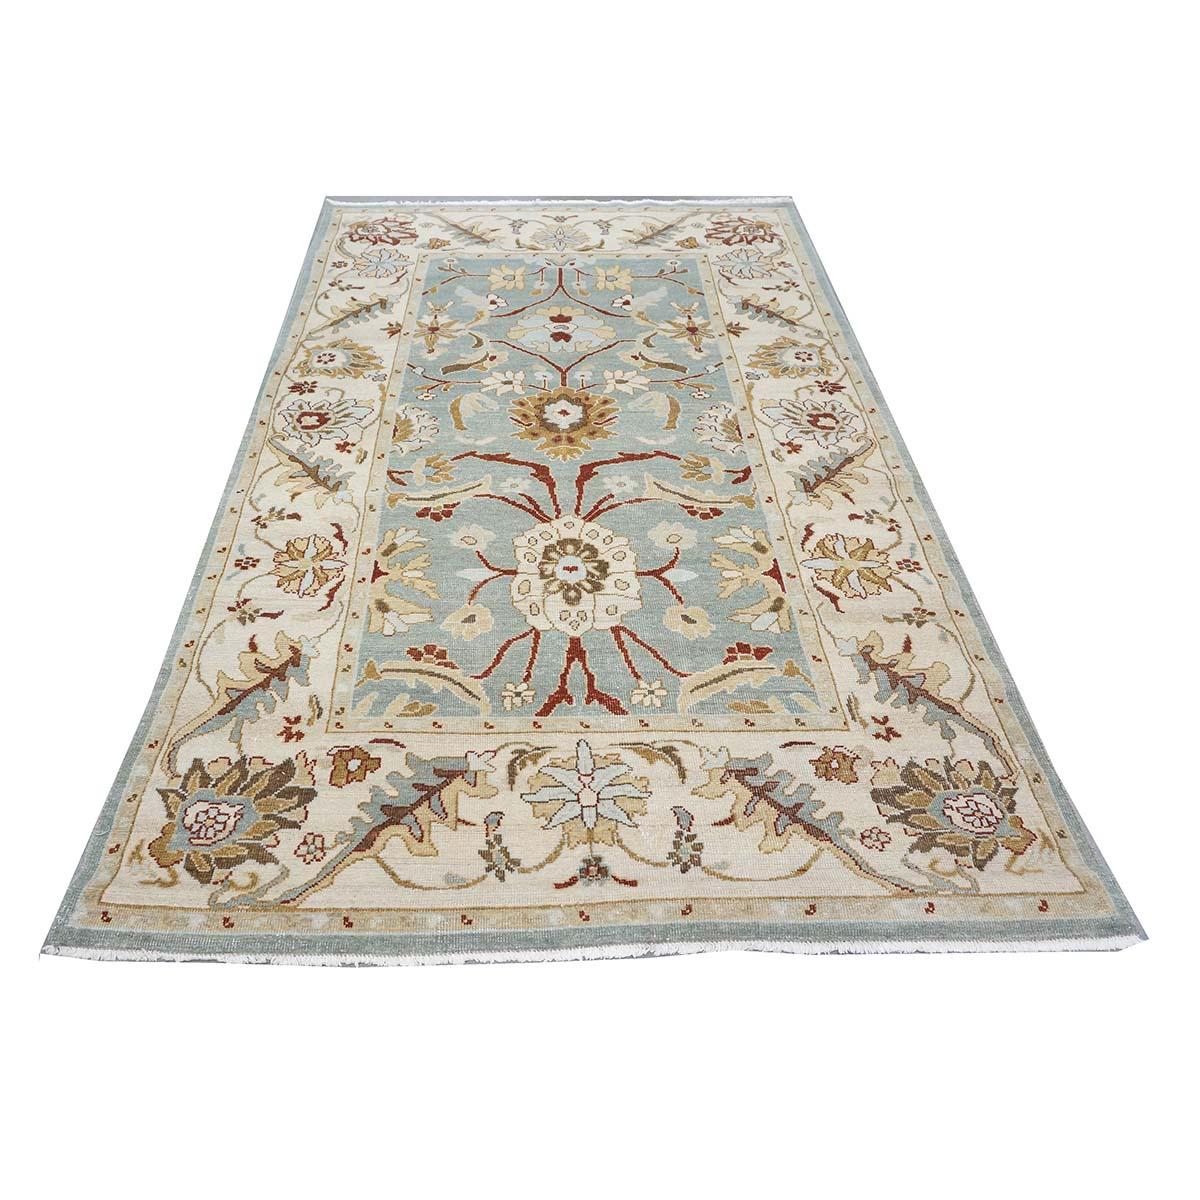 Hand-Knotted 21st Century Sultanabad Master 5x8 Slate Blue, Ivory, Red, Tan Handmade Area Rug For Sale